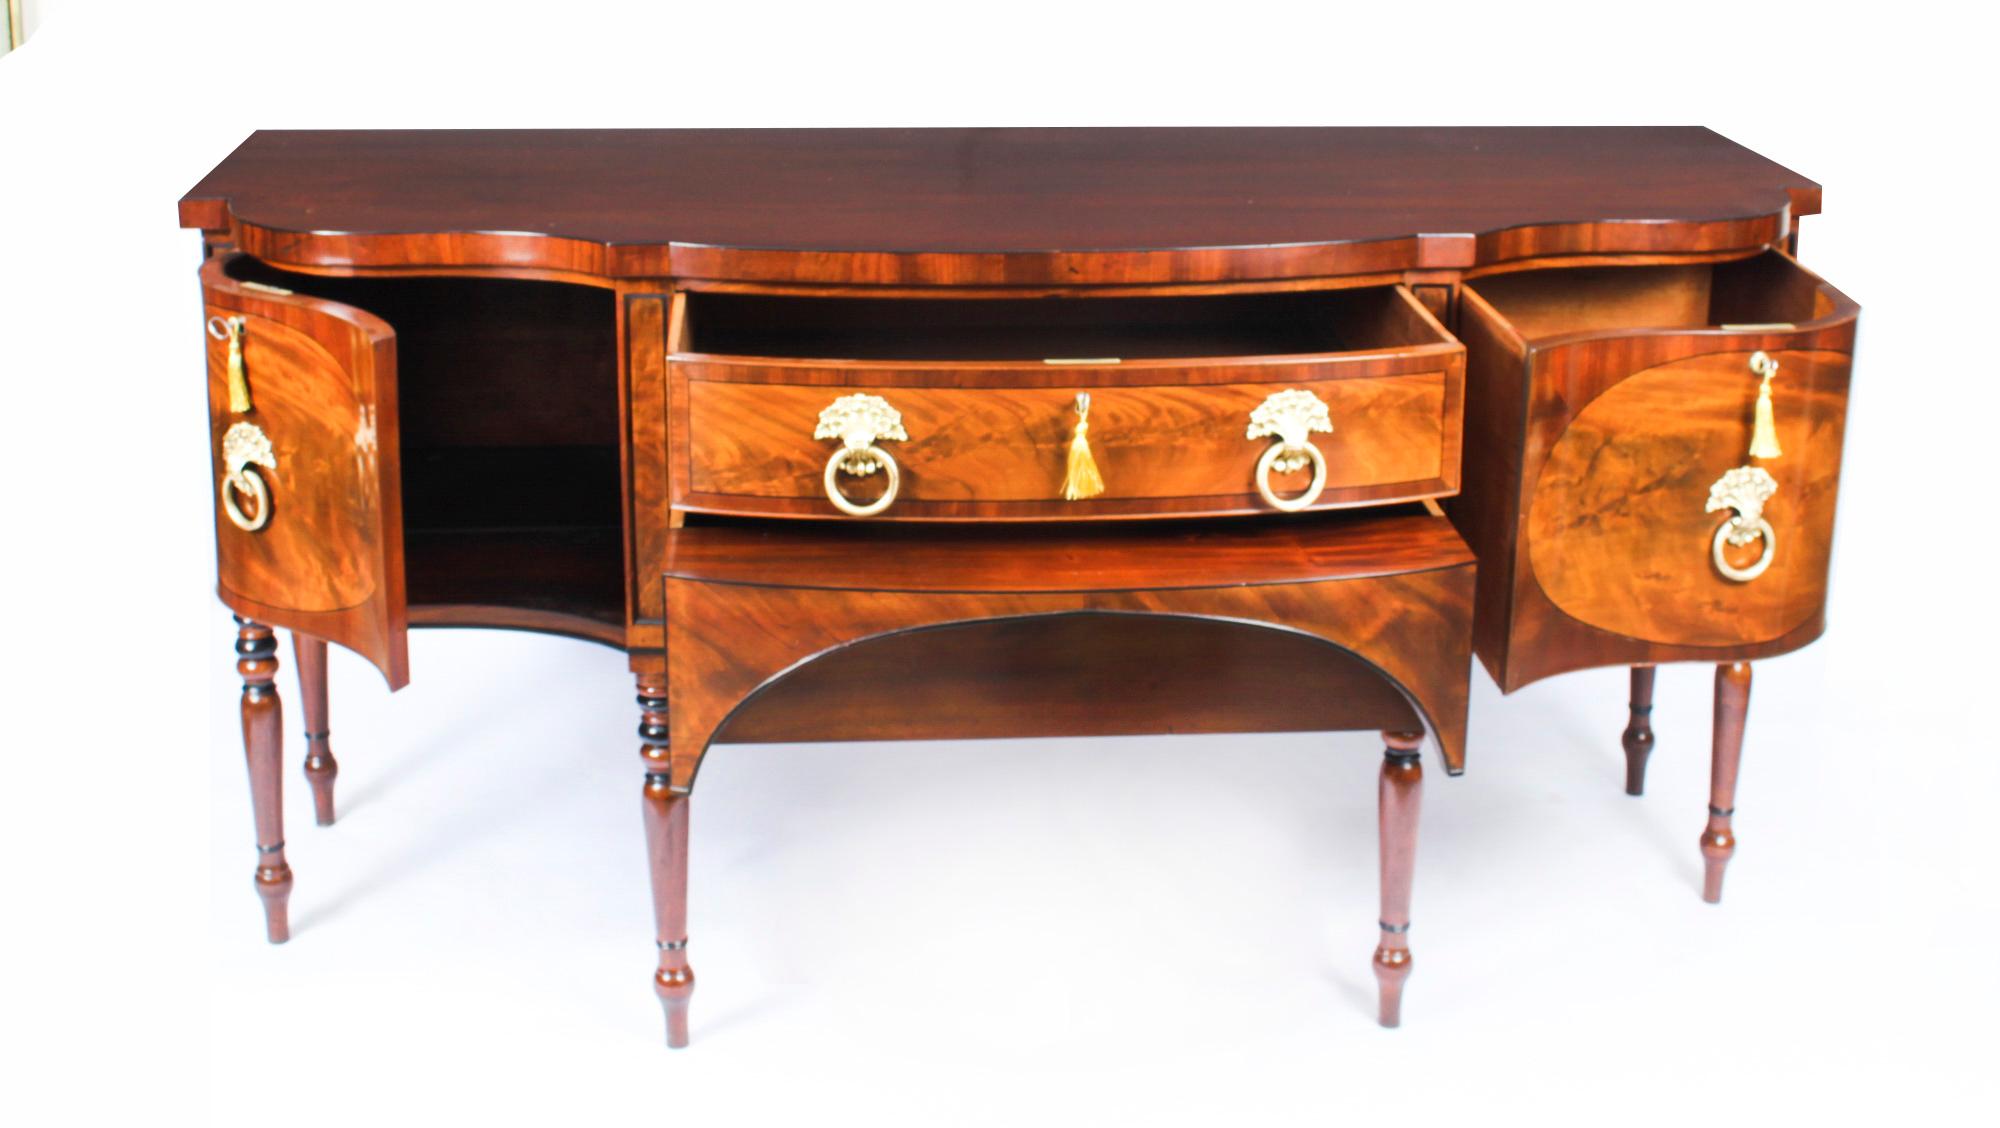 Antique English Regency Flame Mahogany Sideboard 19th Century For Sale 4